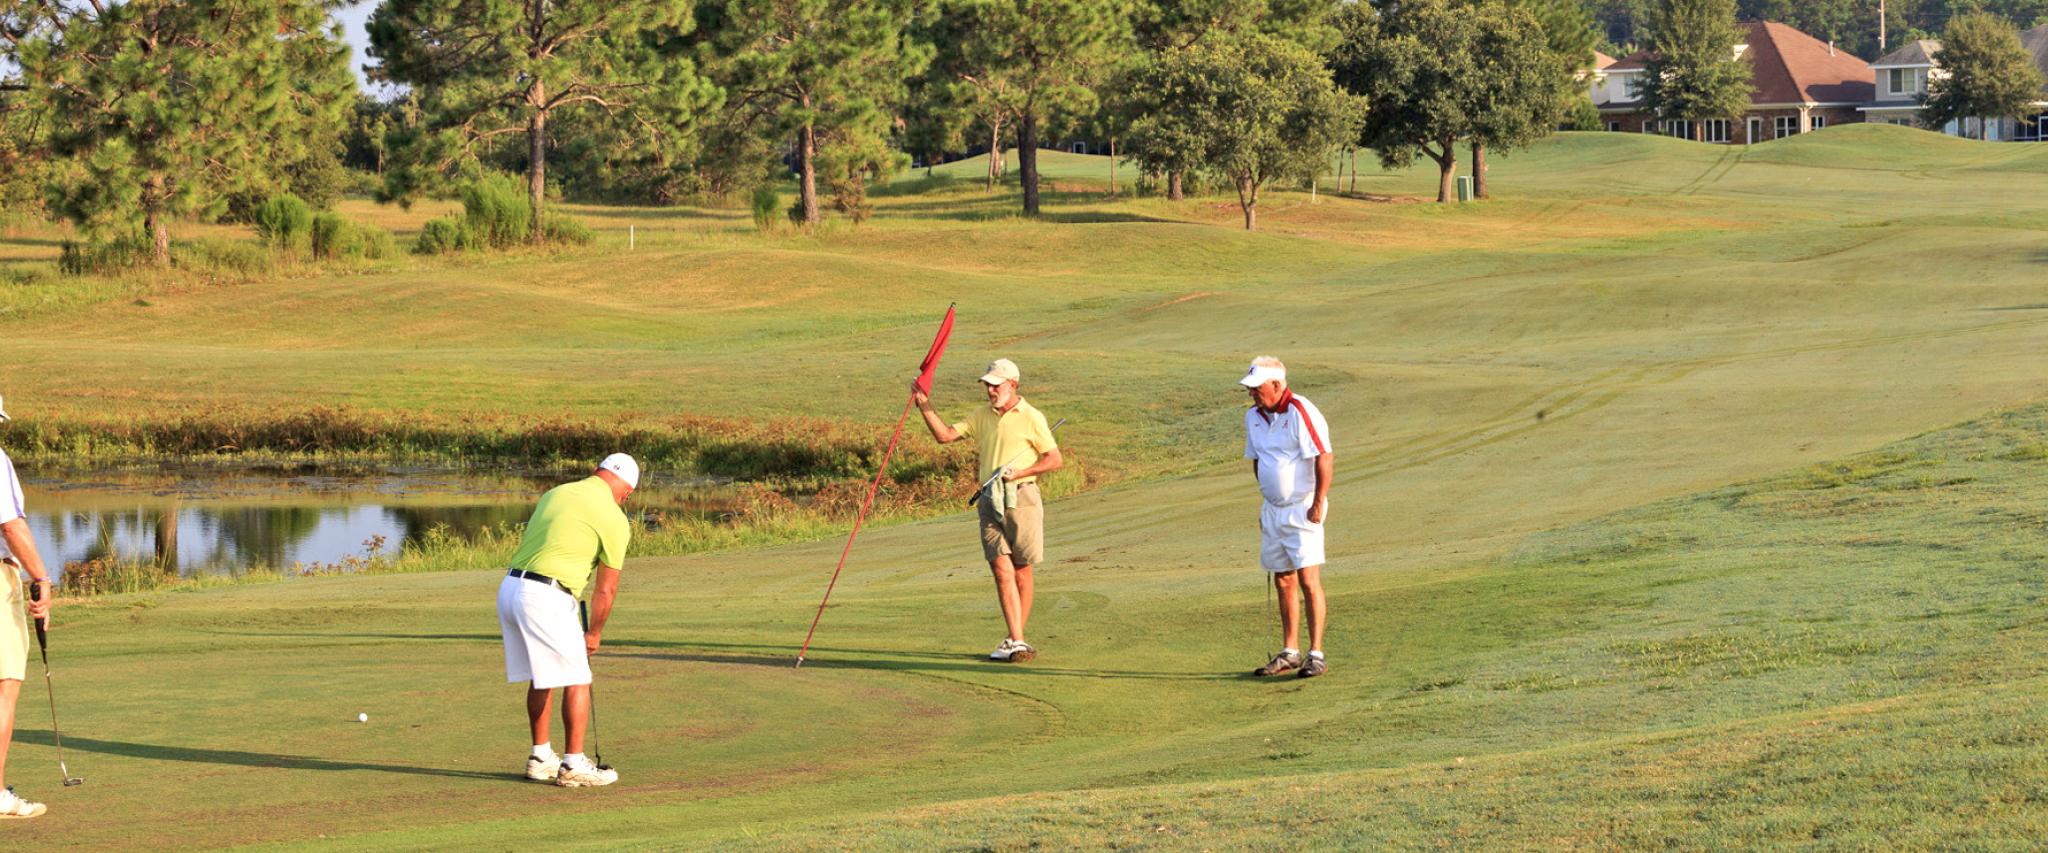 Group of Men play golf in Gulf Shores, AL